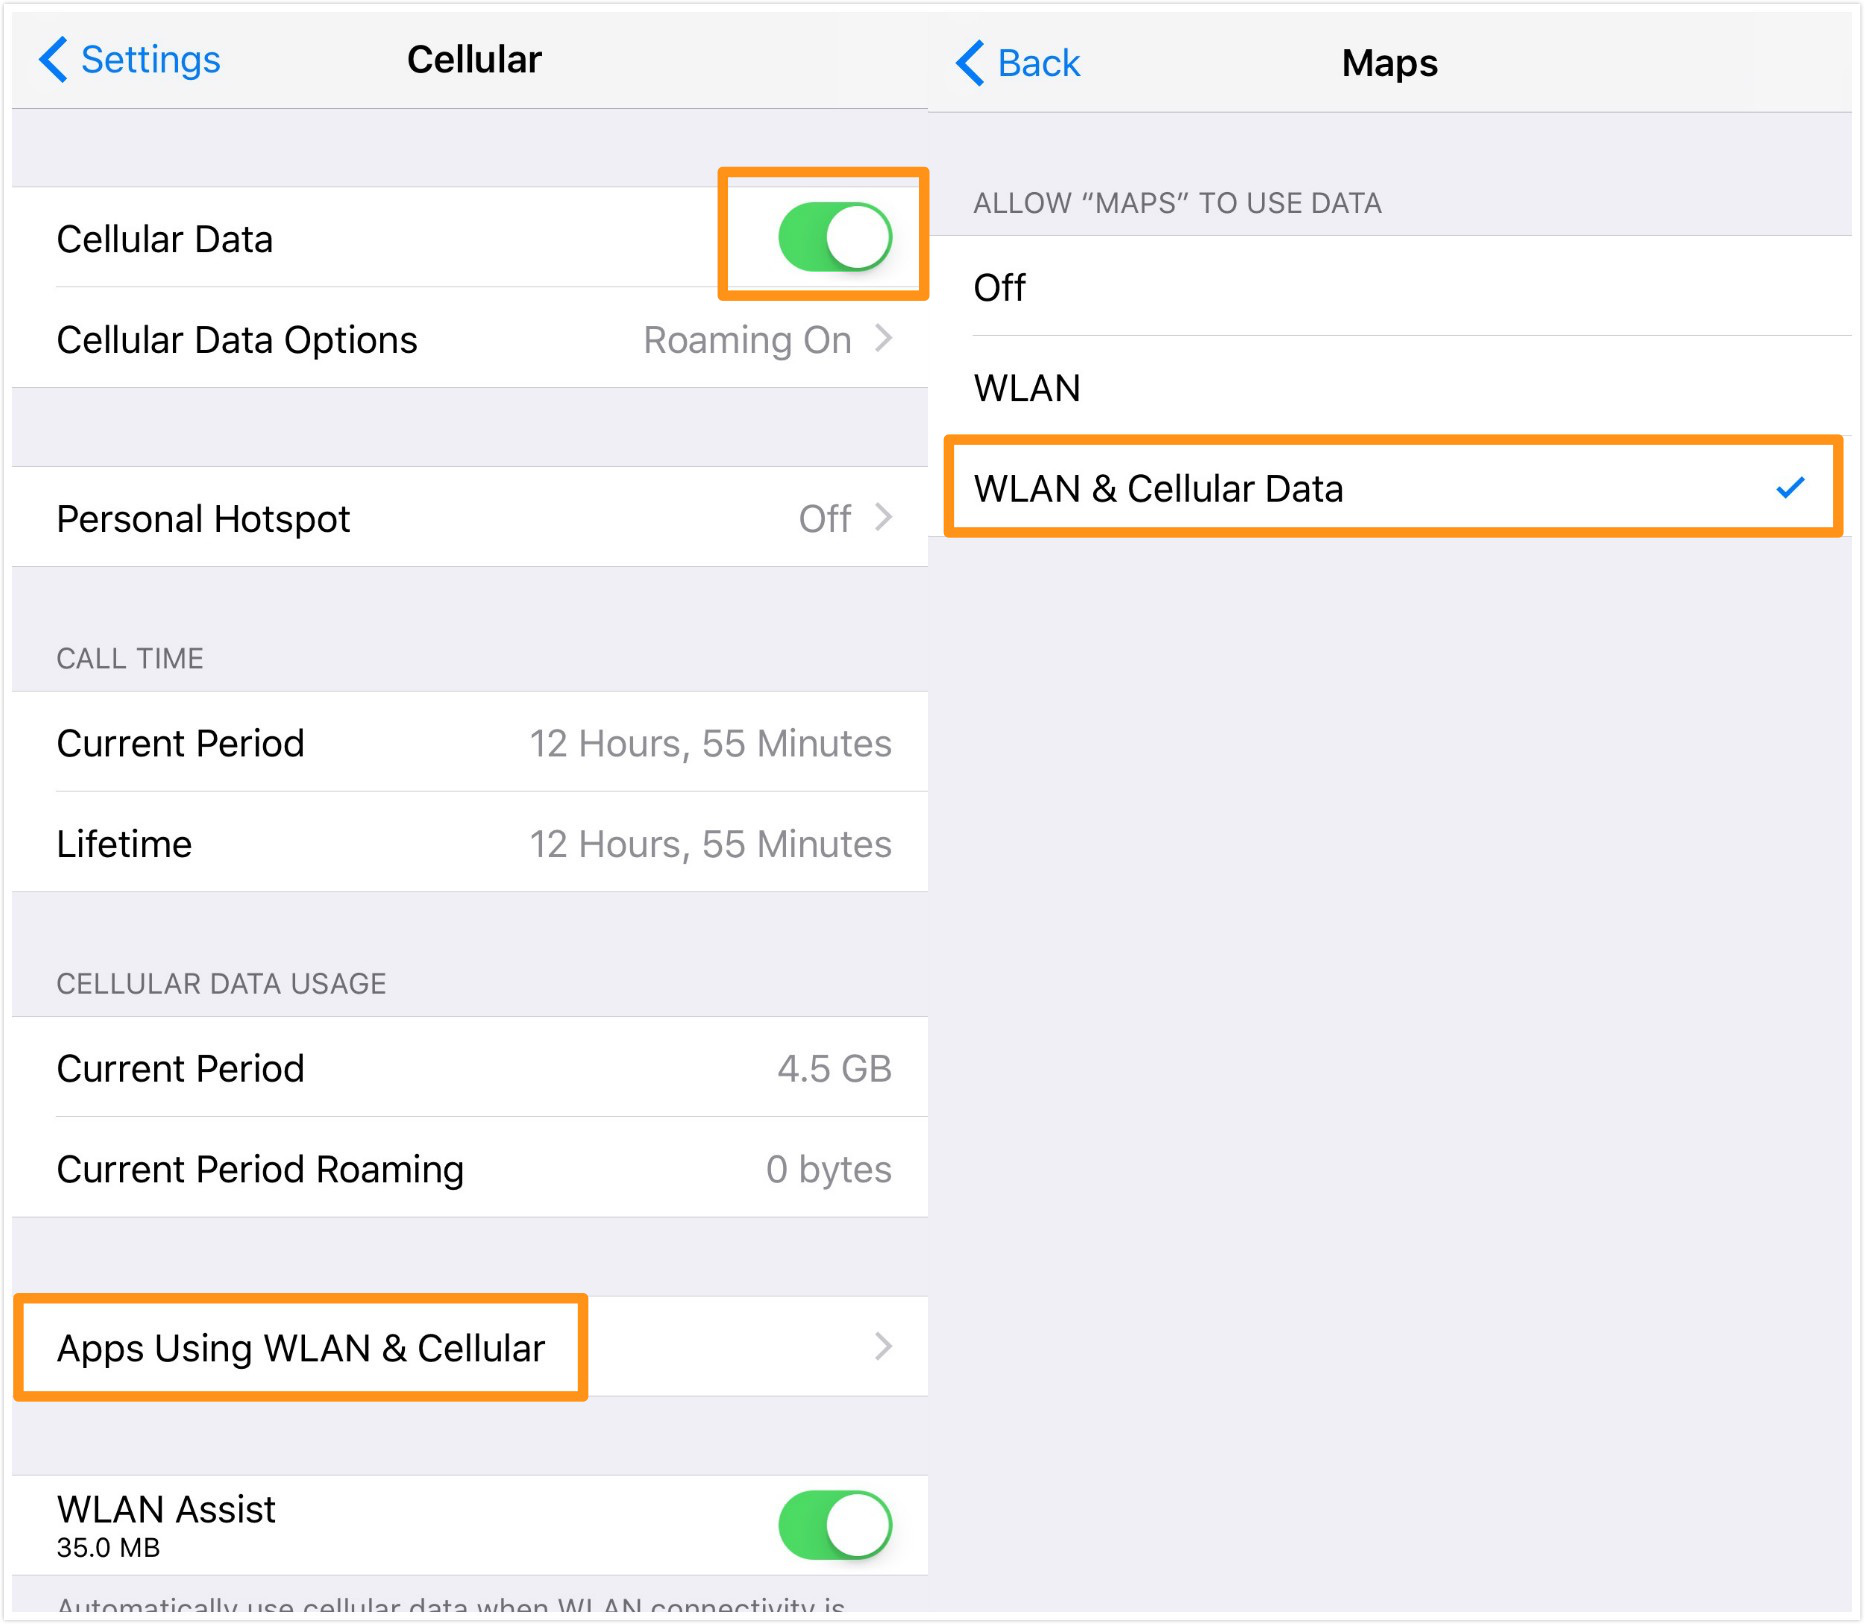 Enable the Cellular Data and WLAN for Maps